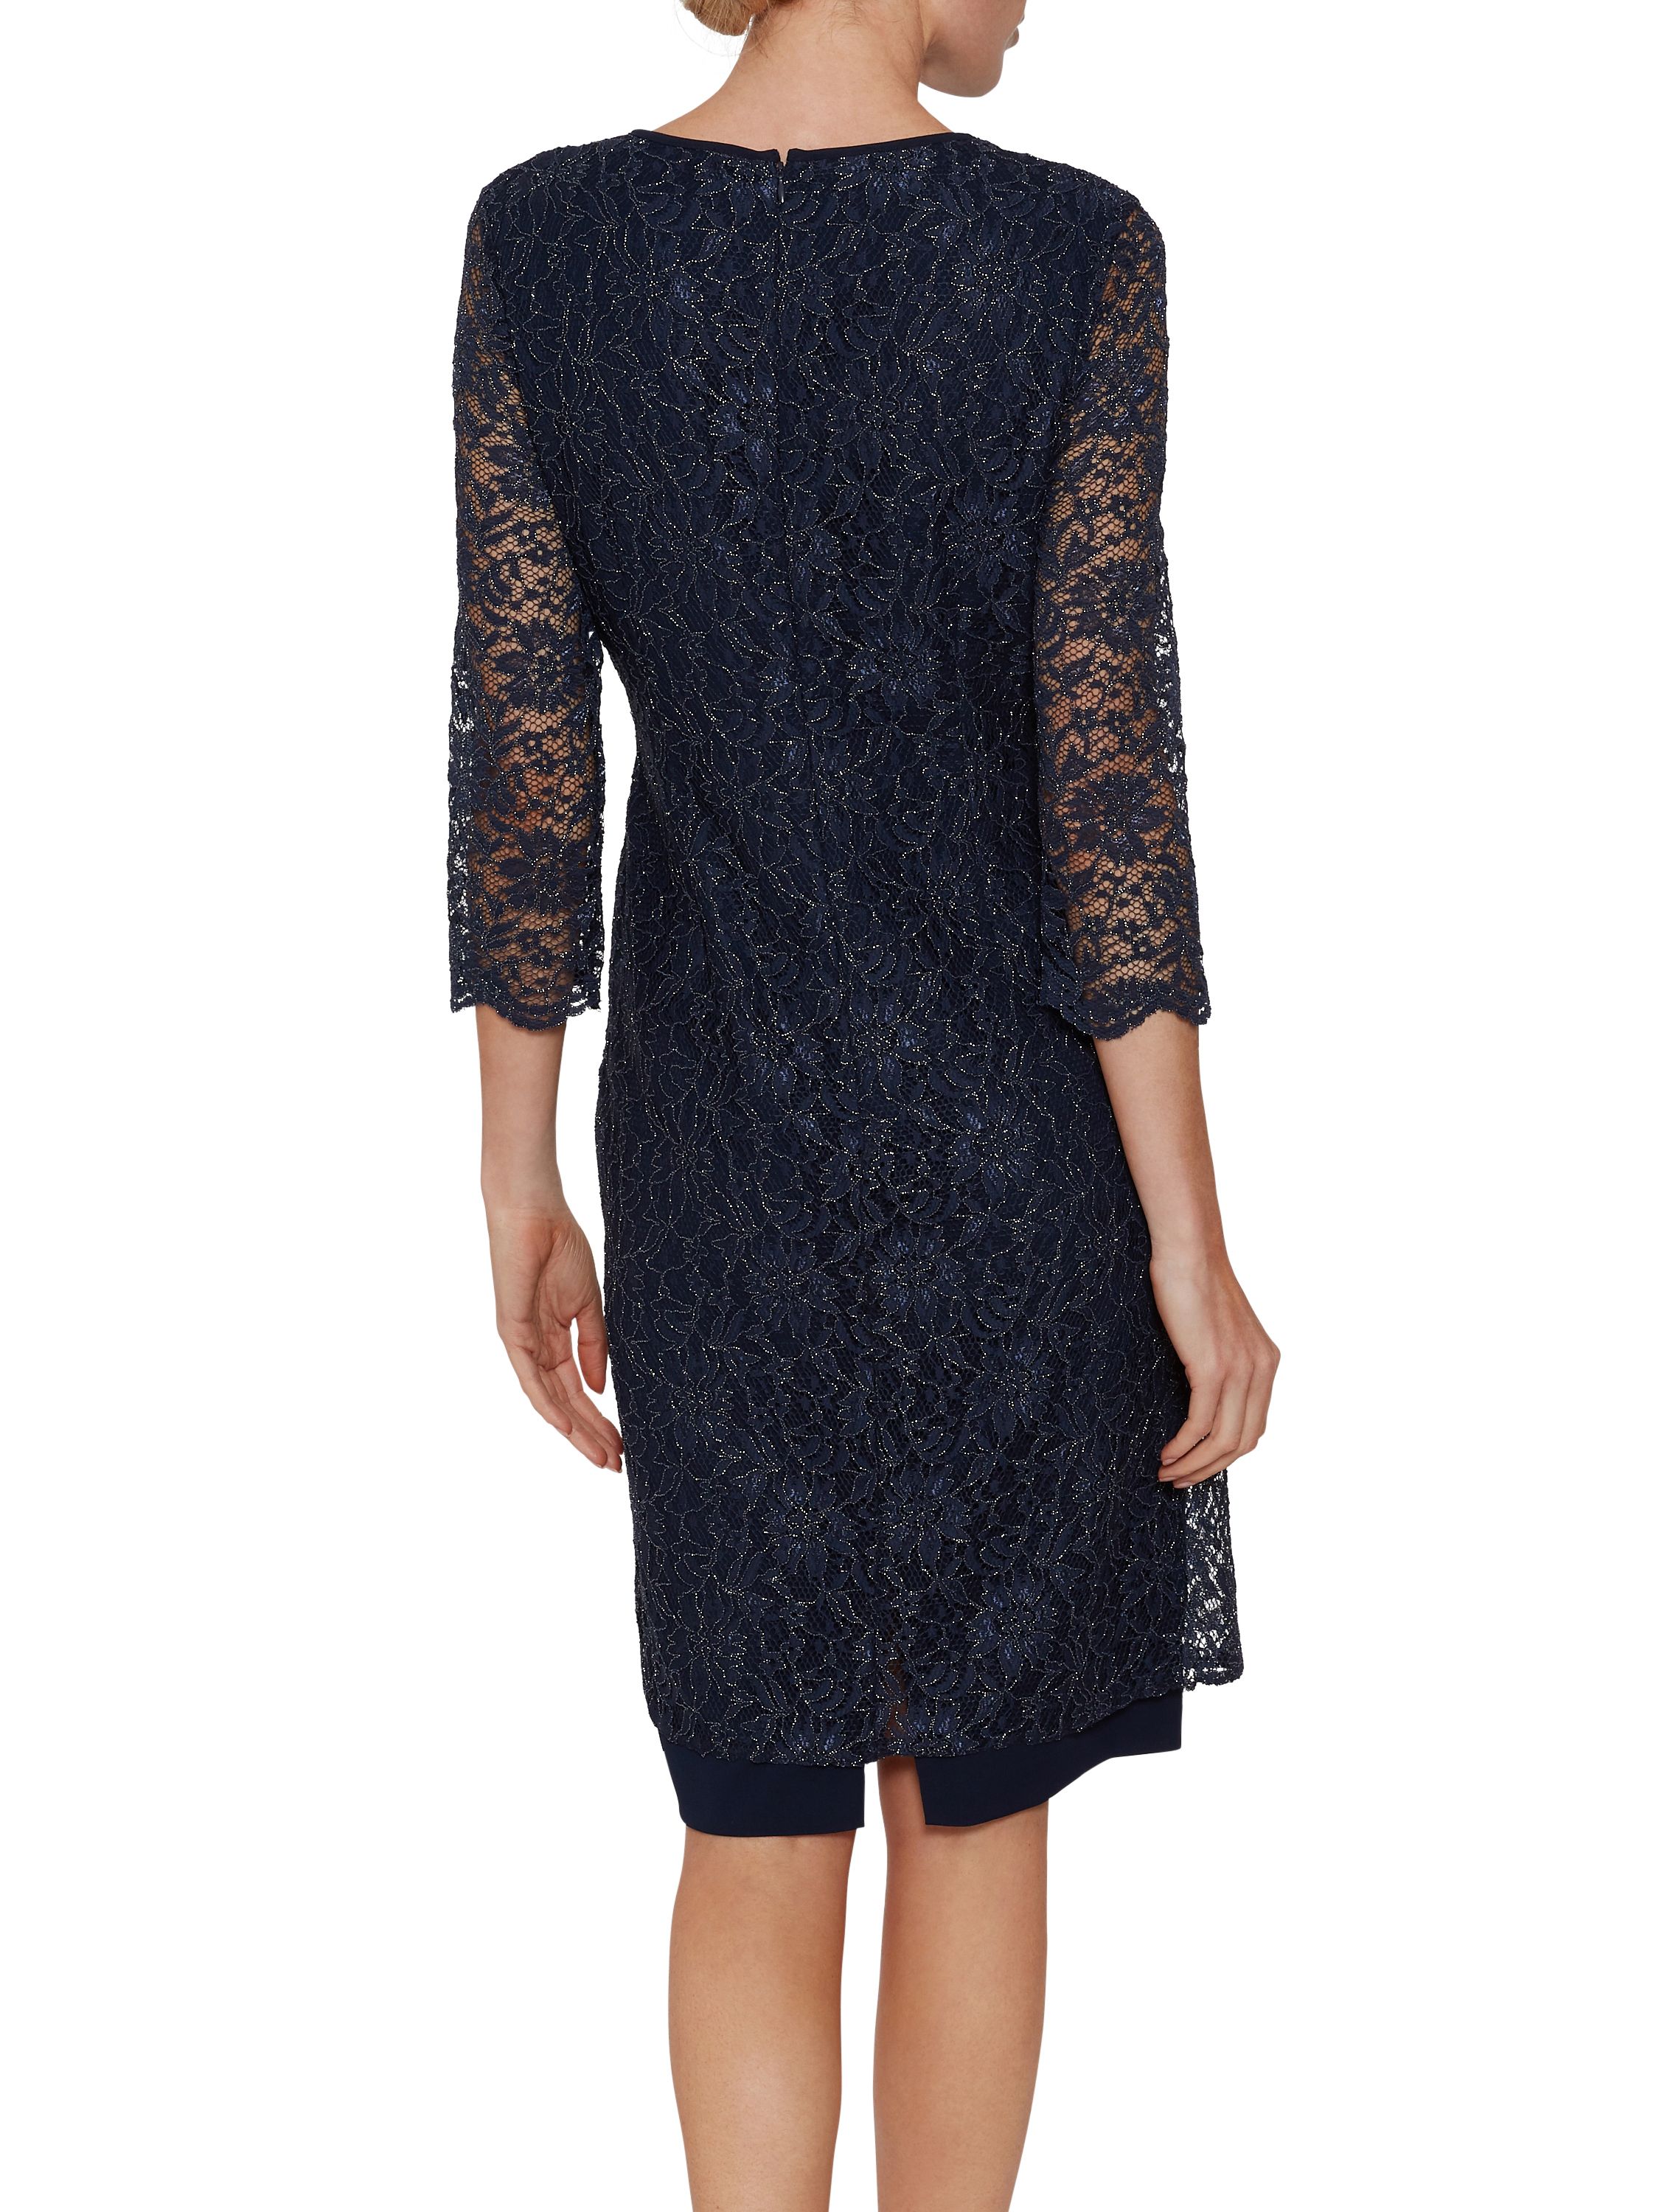 Gina Bacconi presents its stunning crepe and lace dress. This perfect occasionwear piece is comprised of a classic shift dress overlaid with a luxurious stretch lace. The lace features a scallop lace which adorns the front of the dress and the sleeve edge.The dress is fully lined and fastens using a concealed back zip.